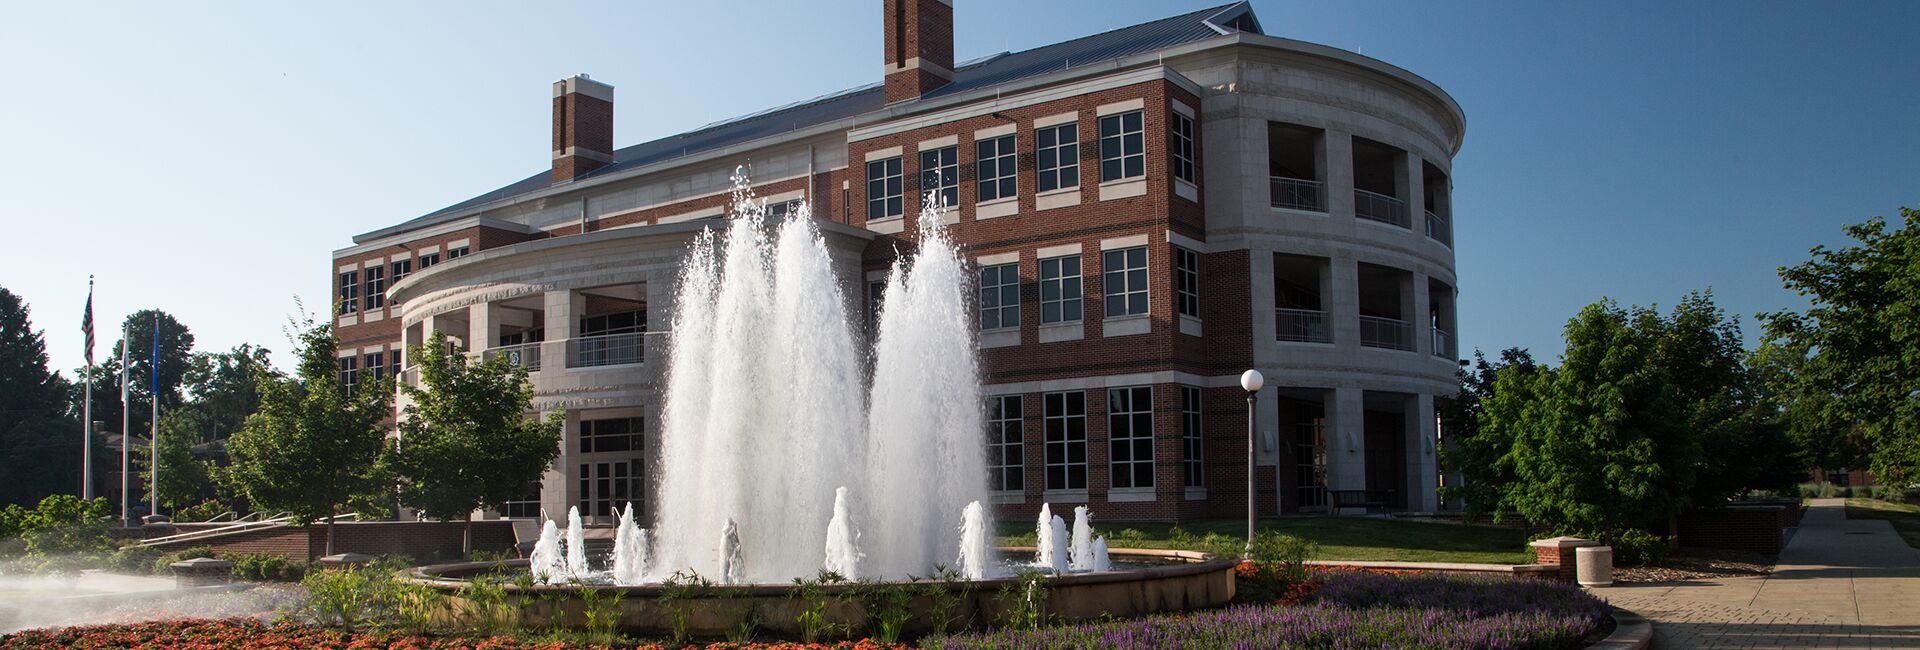 The fountain in front of the Alice Campbell Alumni Center on the Illinois campus